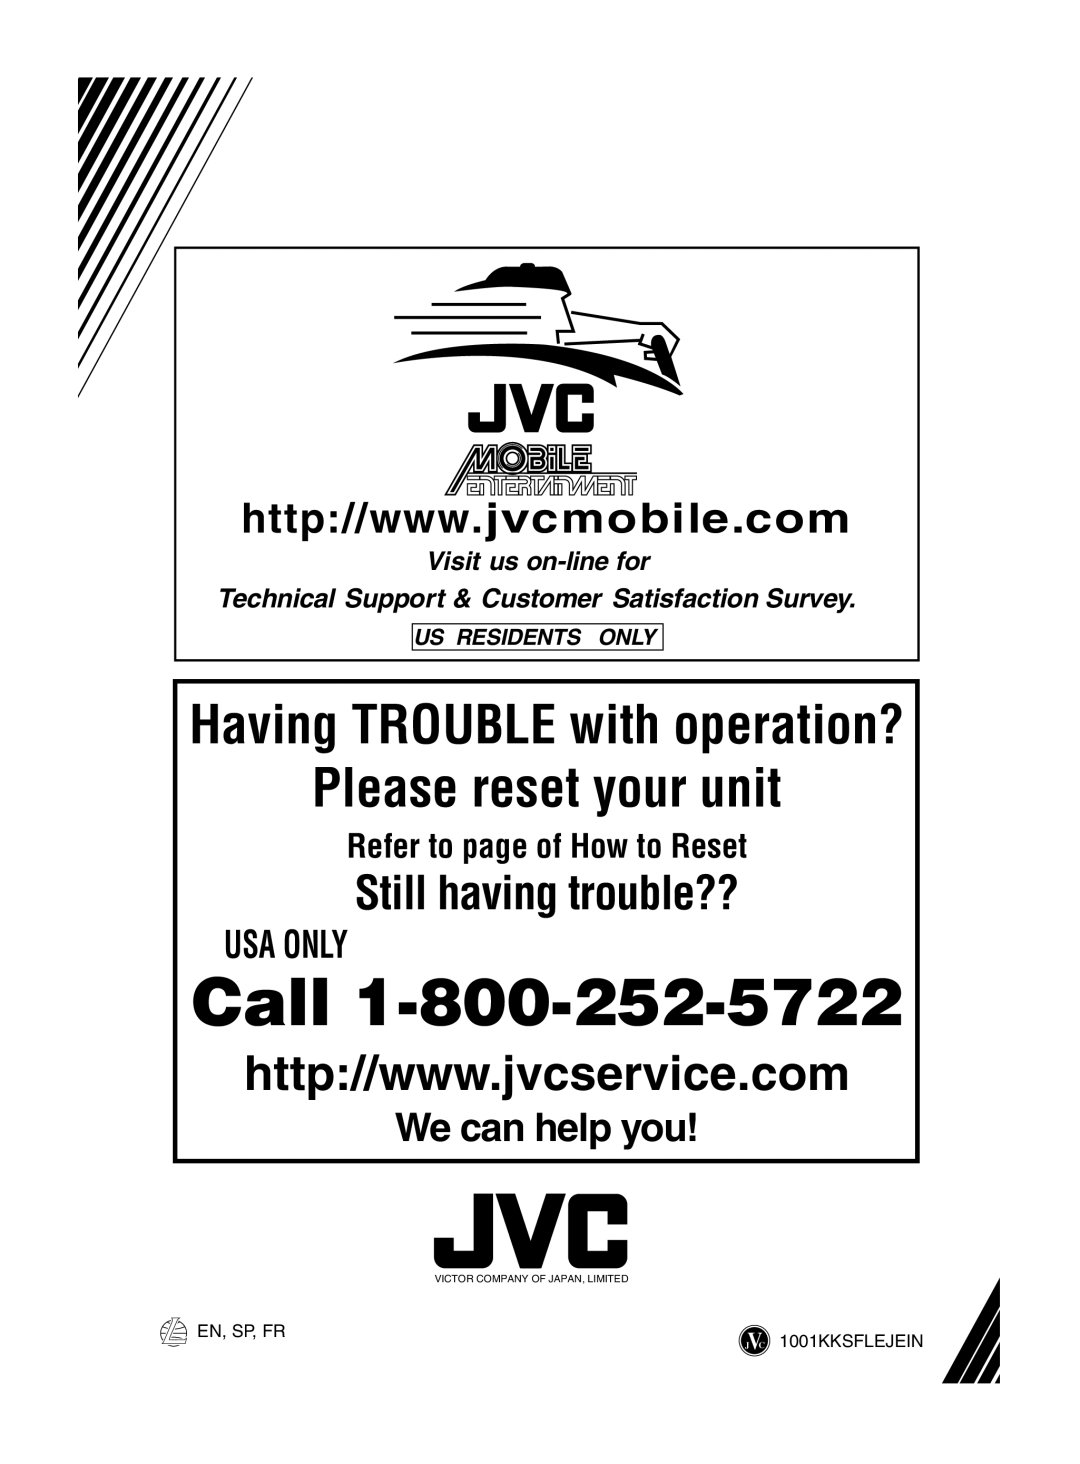 JVC KD-S7250 We can help you, Us Residents Only, Call, Please reset your unit, Having TROUBLE with operation?, Usa Only 